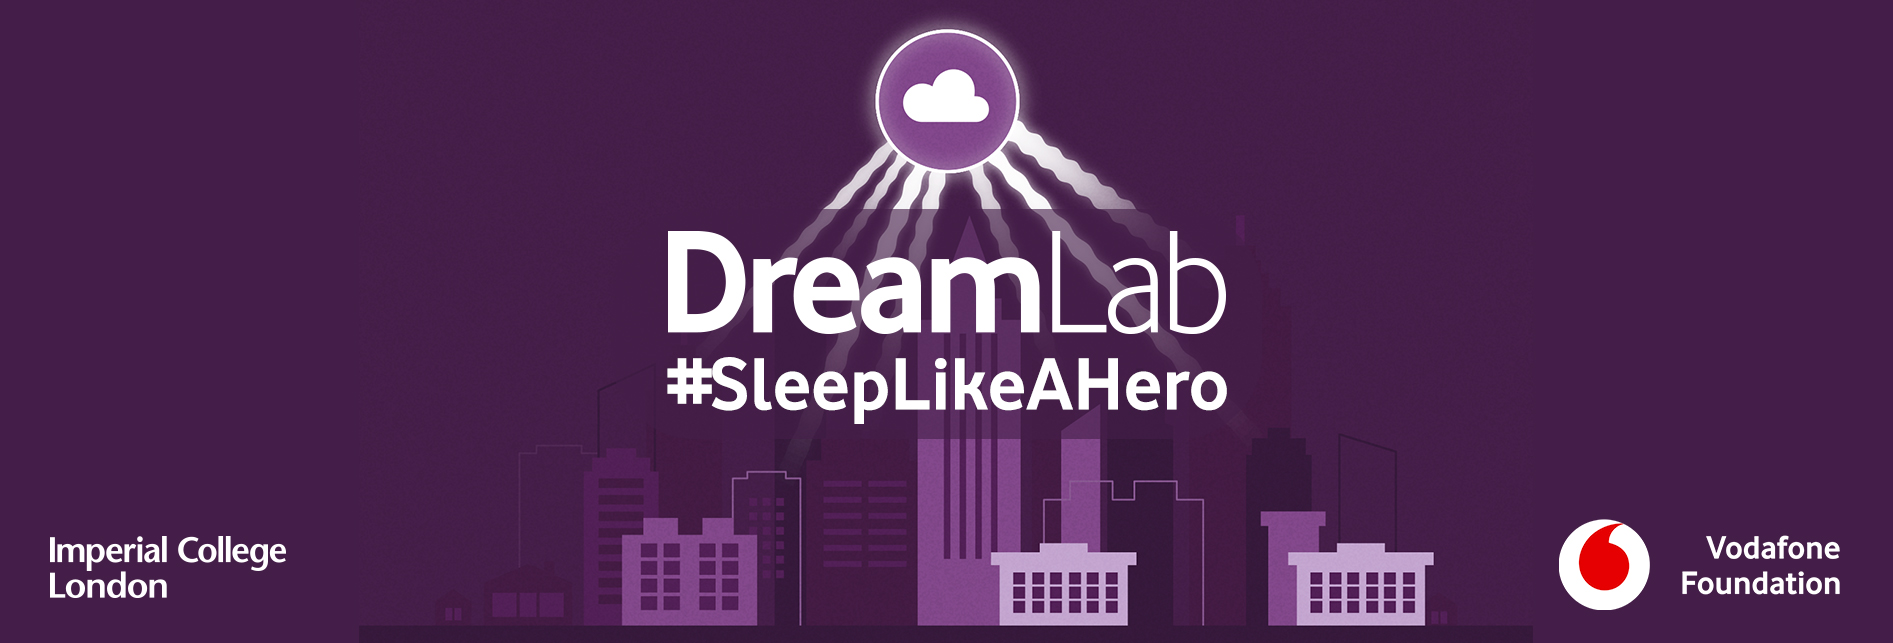 First anniversary of DreamLab in the UK